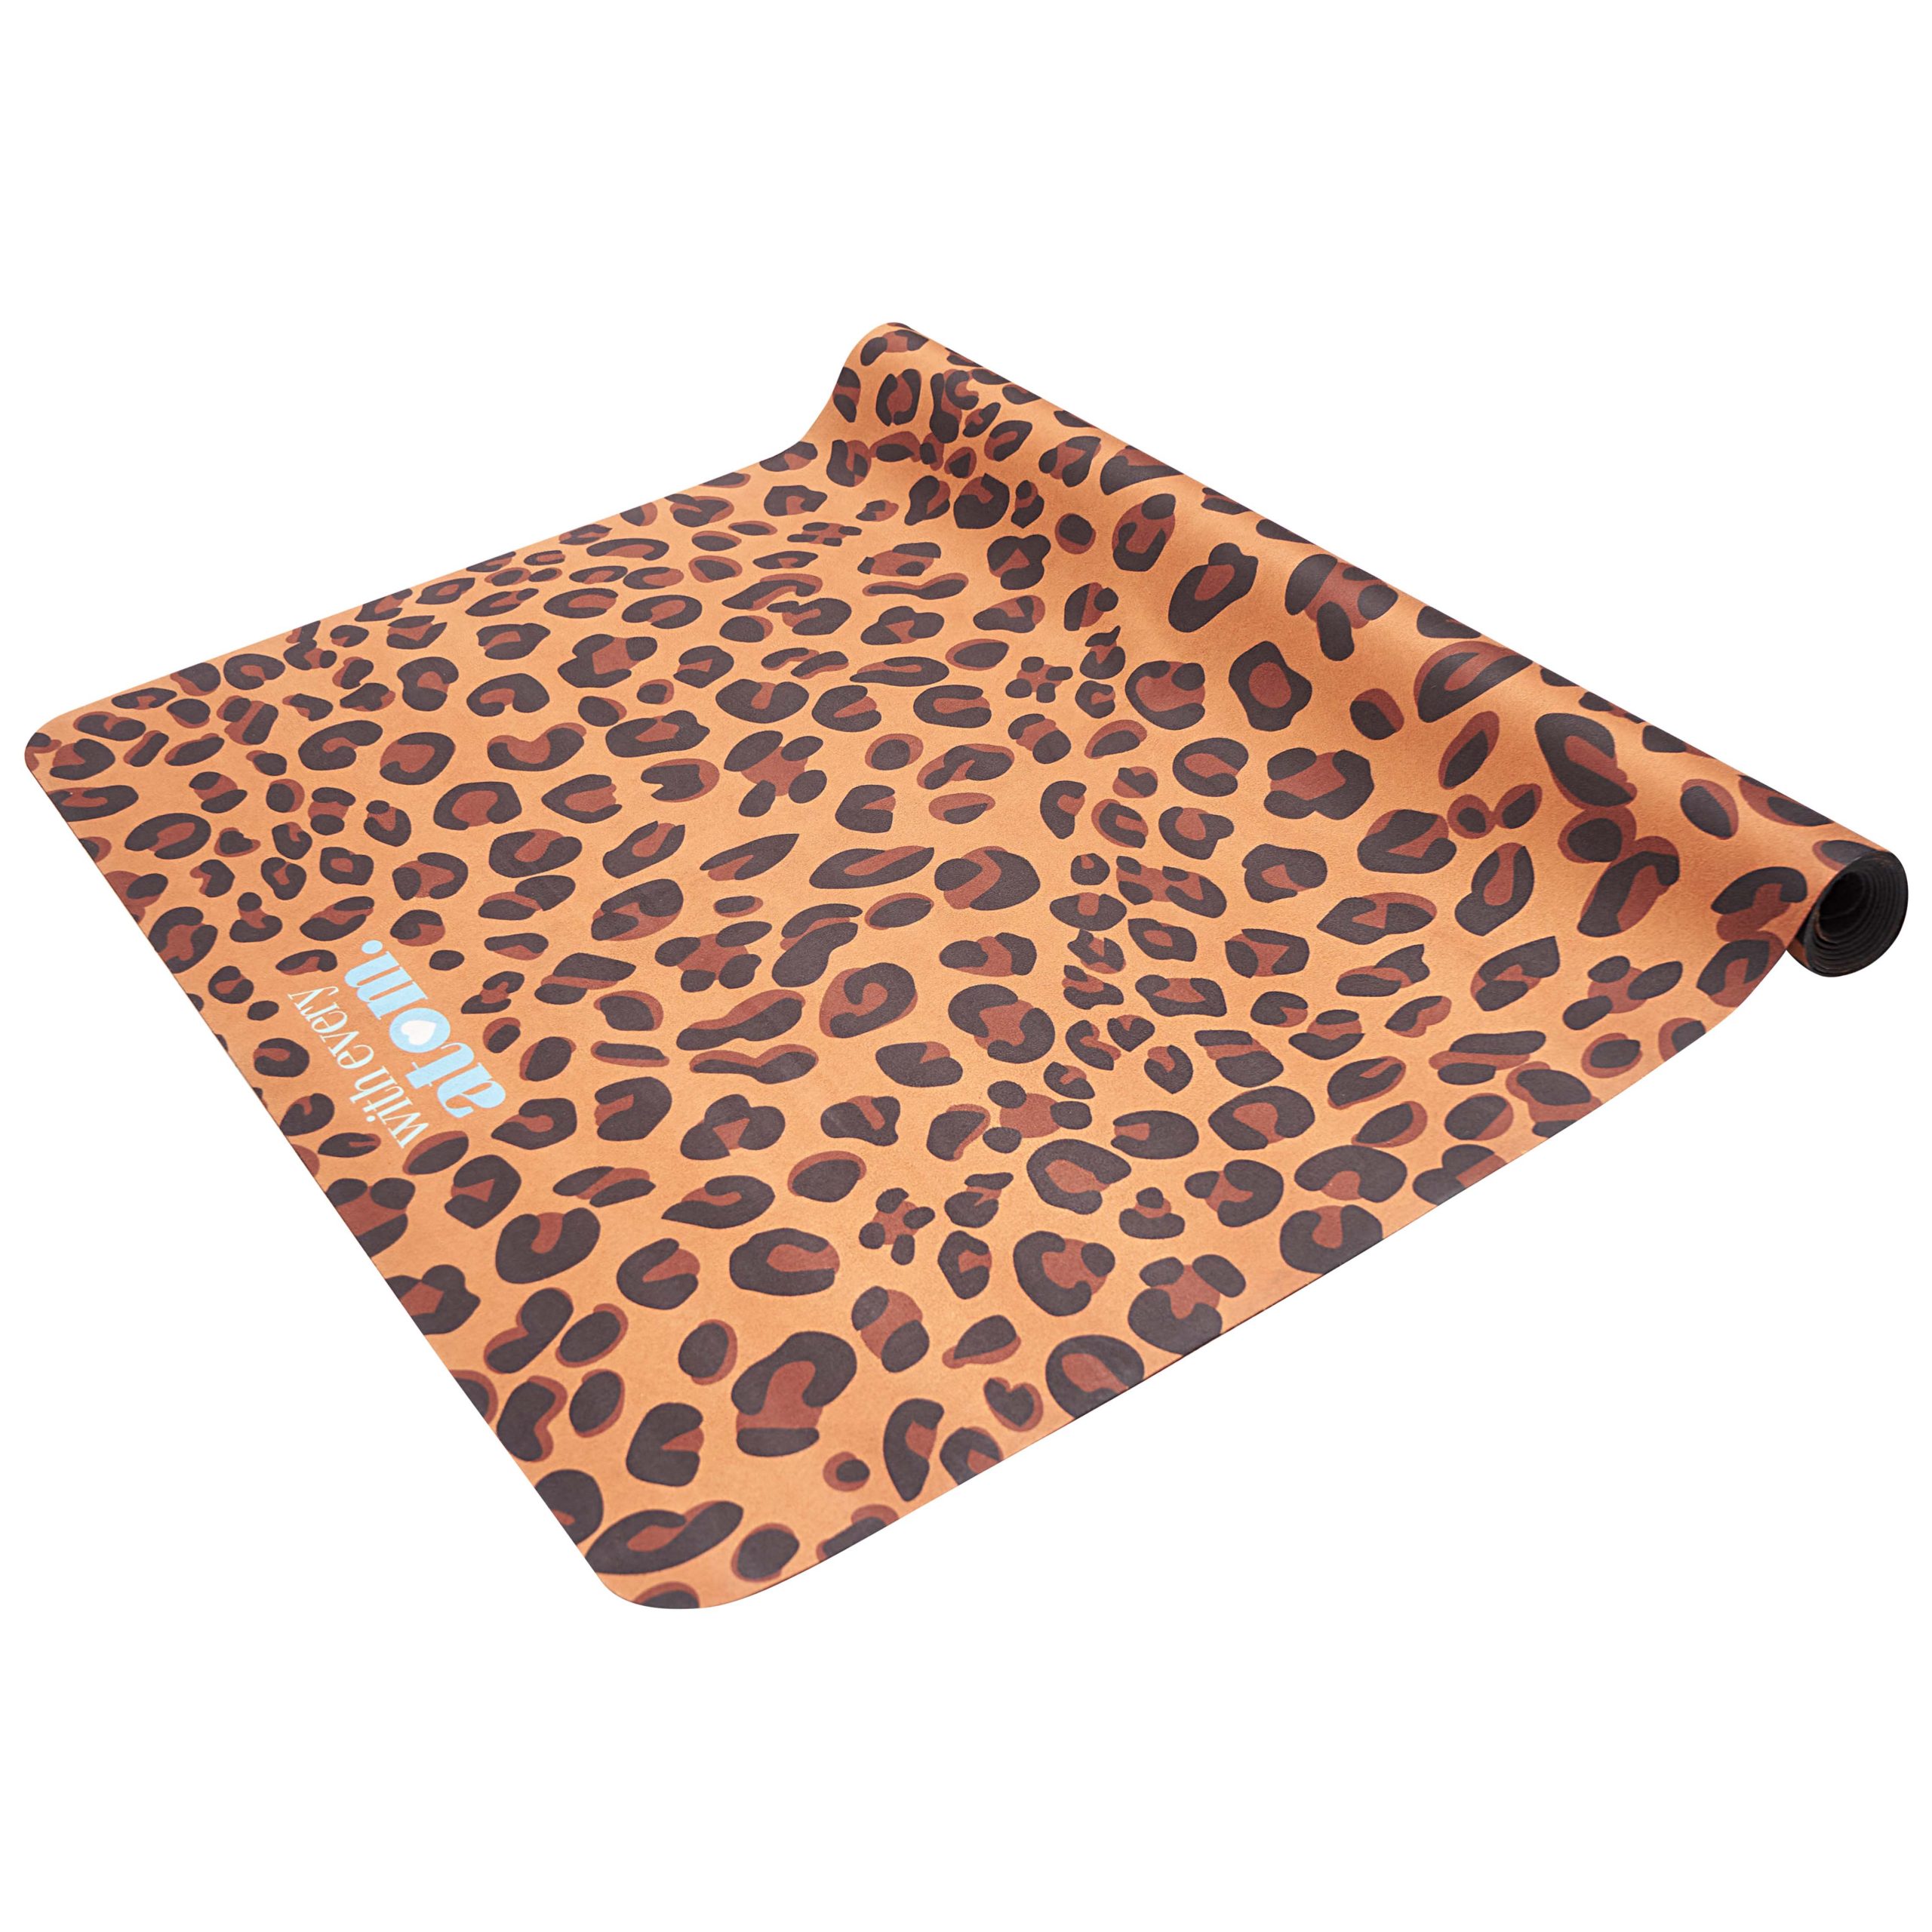 Cute Leopard Print Dog Paw Print Yoga Mat for Home Workout Fitness Mat for  Women Non Slip Exercise Mats with Storage Bag